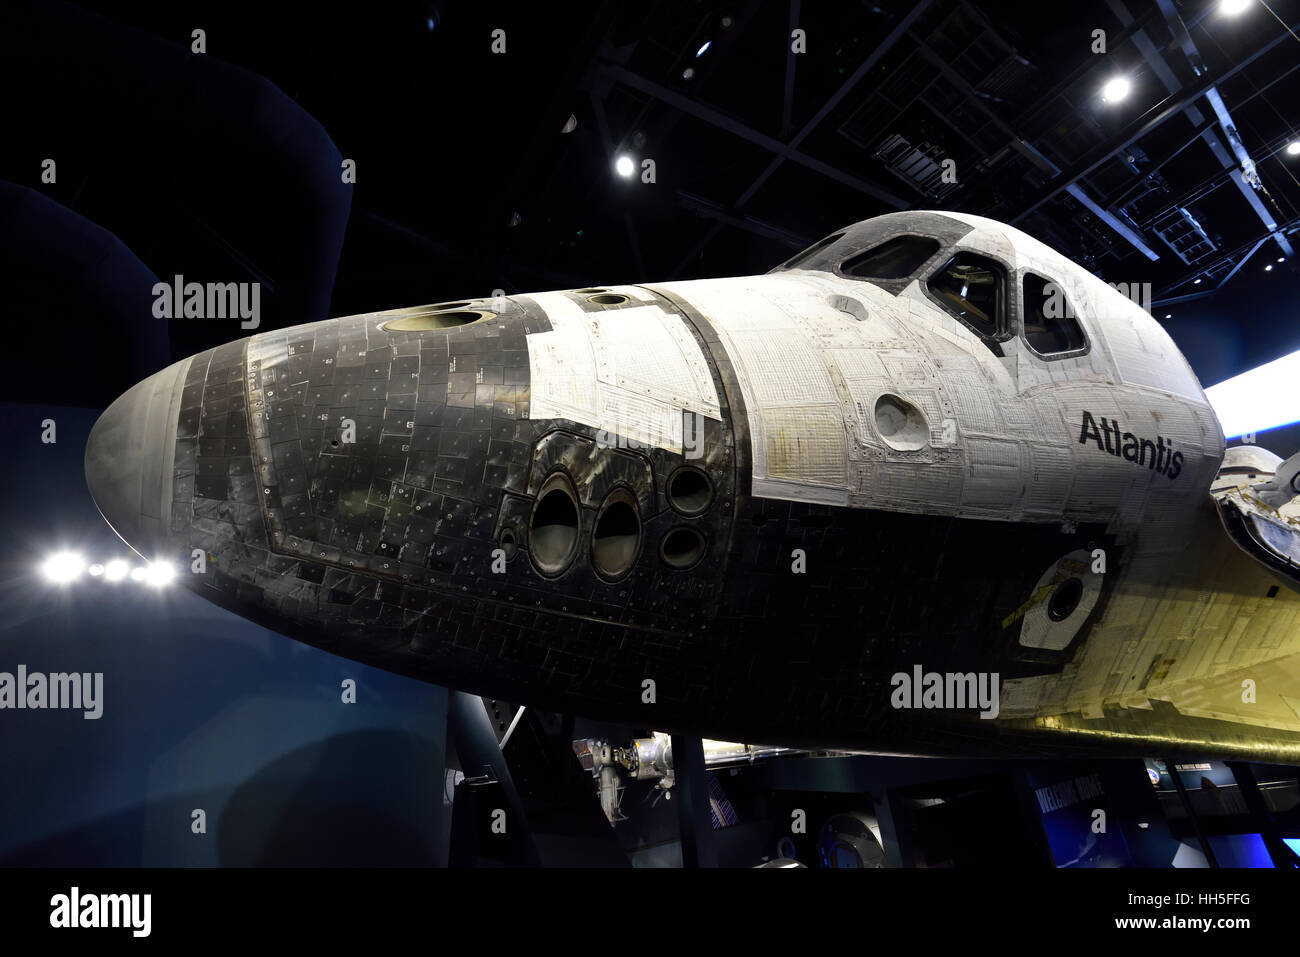 Space shuttle Atlantis on display at the Kennedy Space Center in Florida Stock Photo